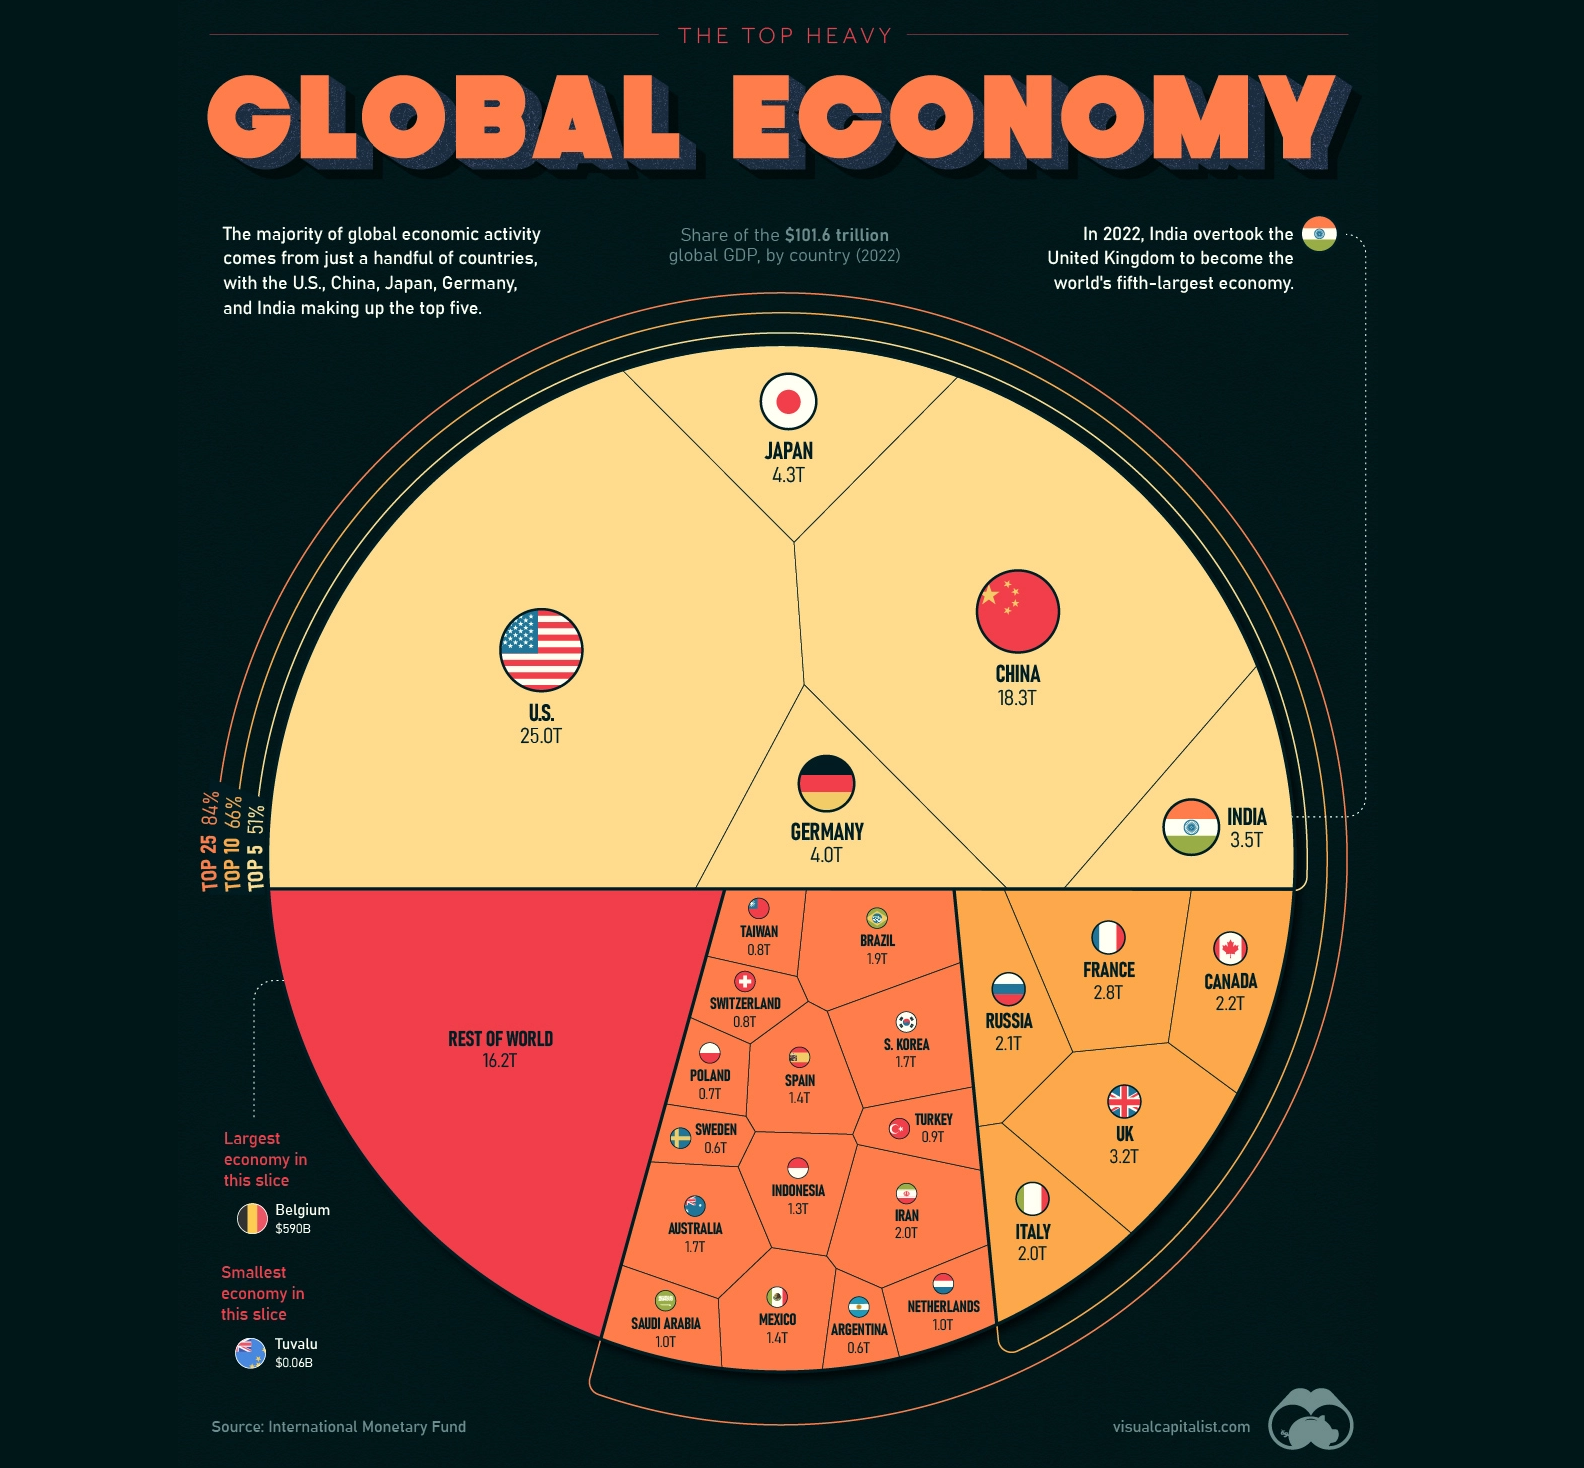 Global Economic Power Rankings A Look at the Countries Dominating the